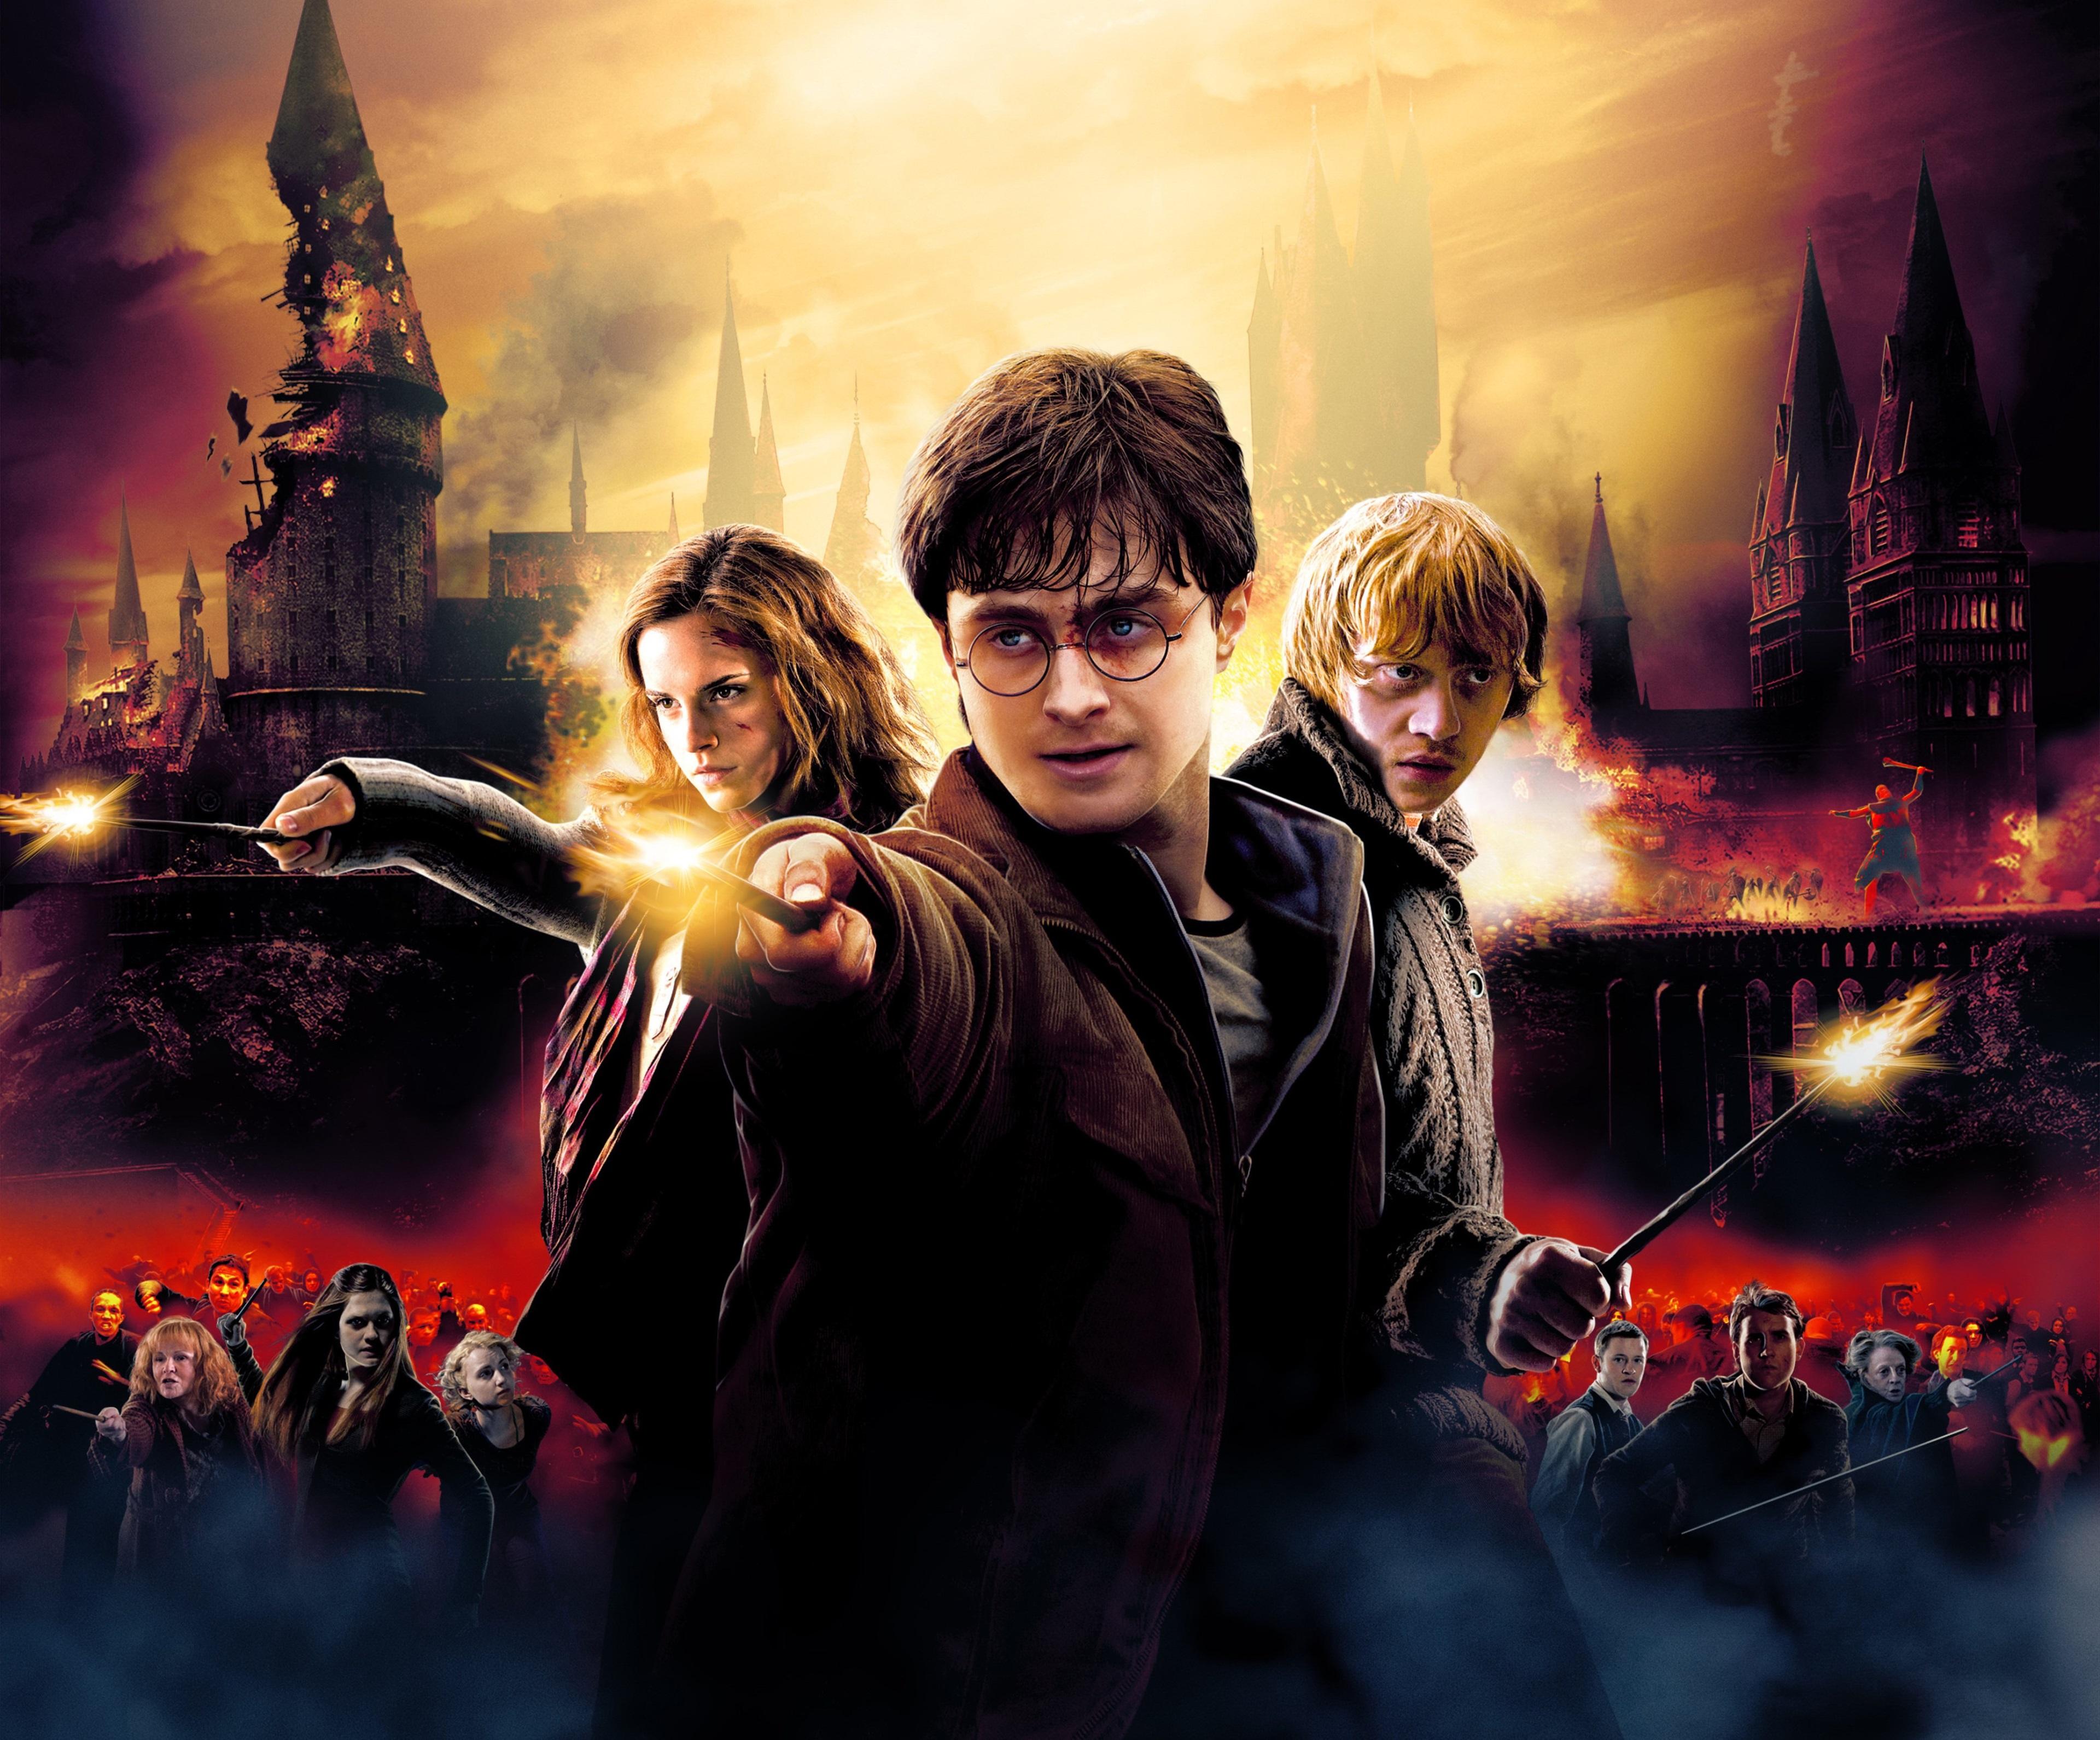 2636980 3840x3182 harry potter and the deathly hallows 4k